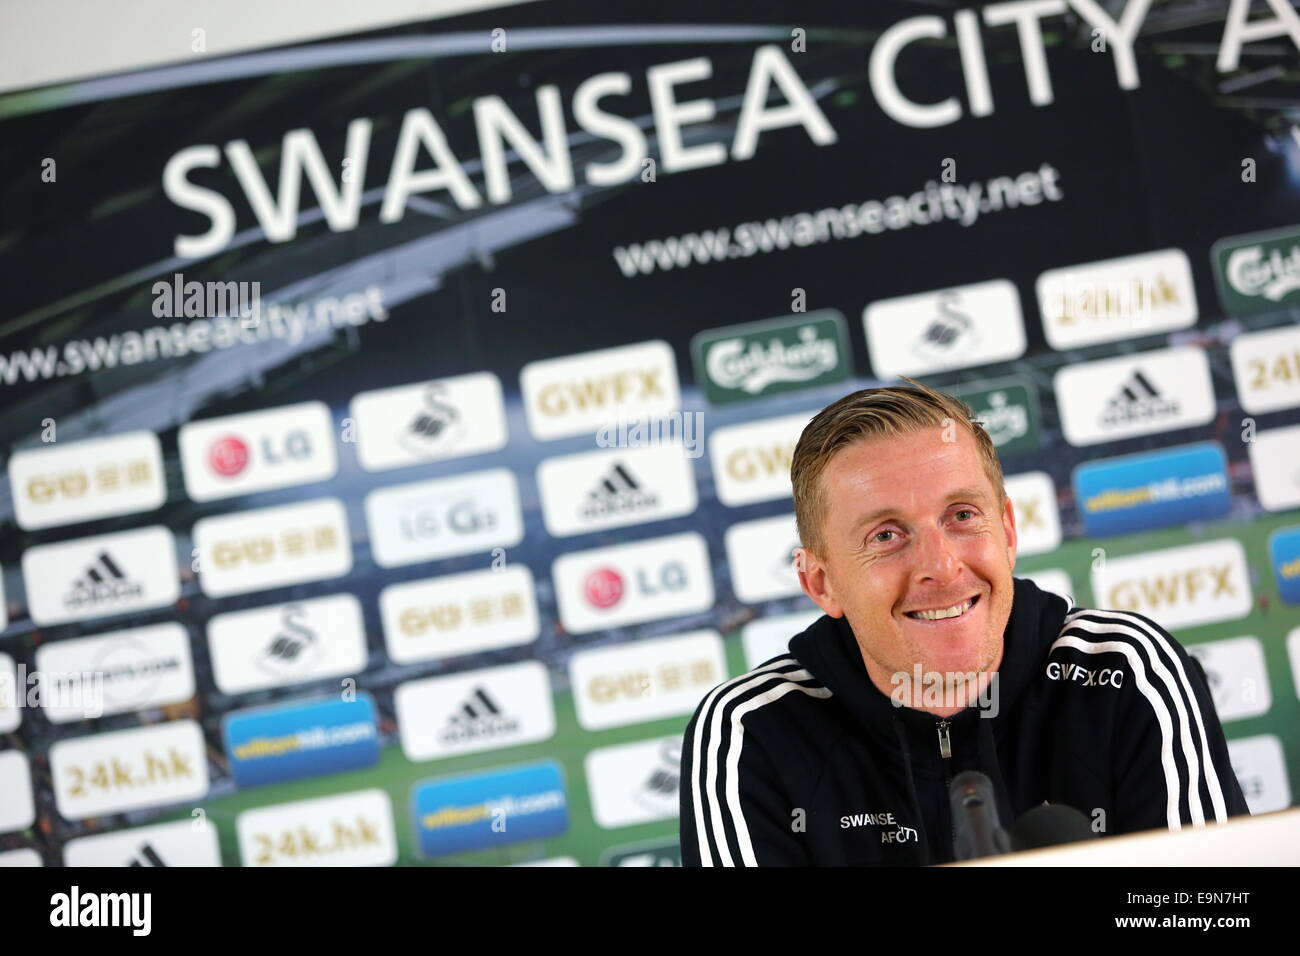 Swansea, UK. Thursday 30 October 2014  Pictured: Manager Garry Monk.   Re: Swansea City FC press conference ahead of their Premier League game against Everton. Liberty Stadium, UK. Credit:  D Legakis/Alamy Live News Stock Photo